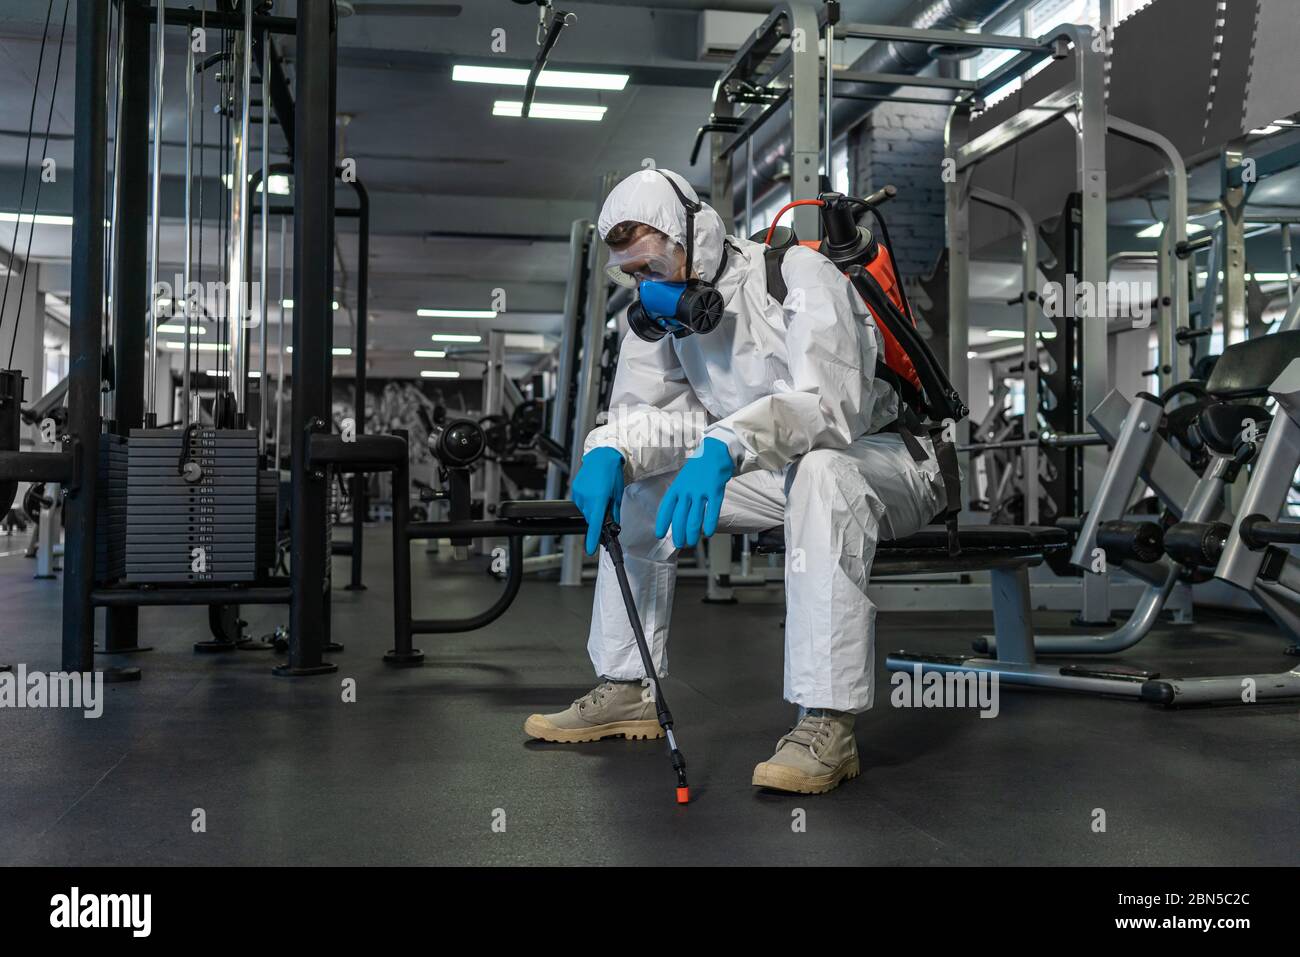 Cleaning and Disinfection in crowded places amid the coronavirus epidemic Gym cleaning and disinfection Infection prevention and control of epidemic. Stock Photo